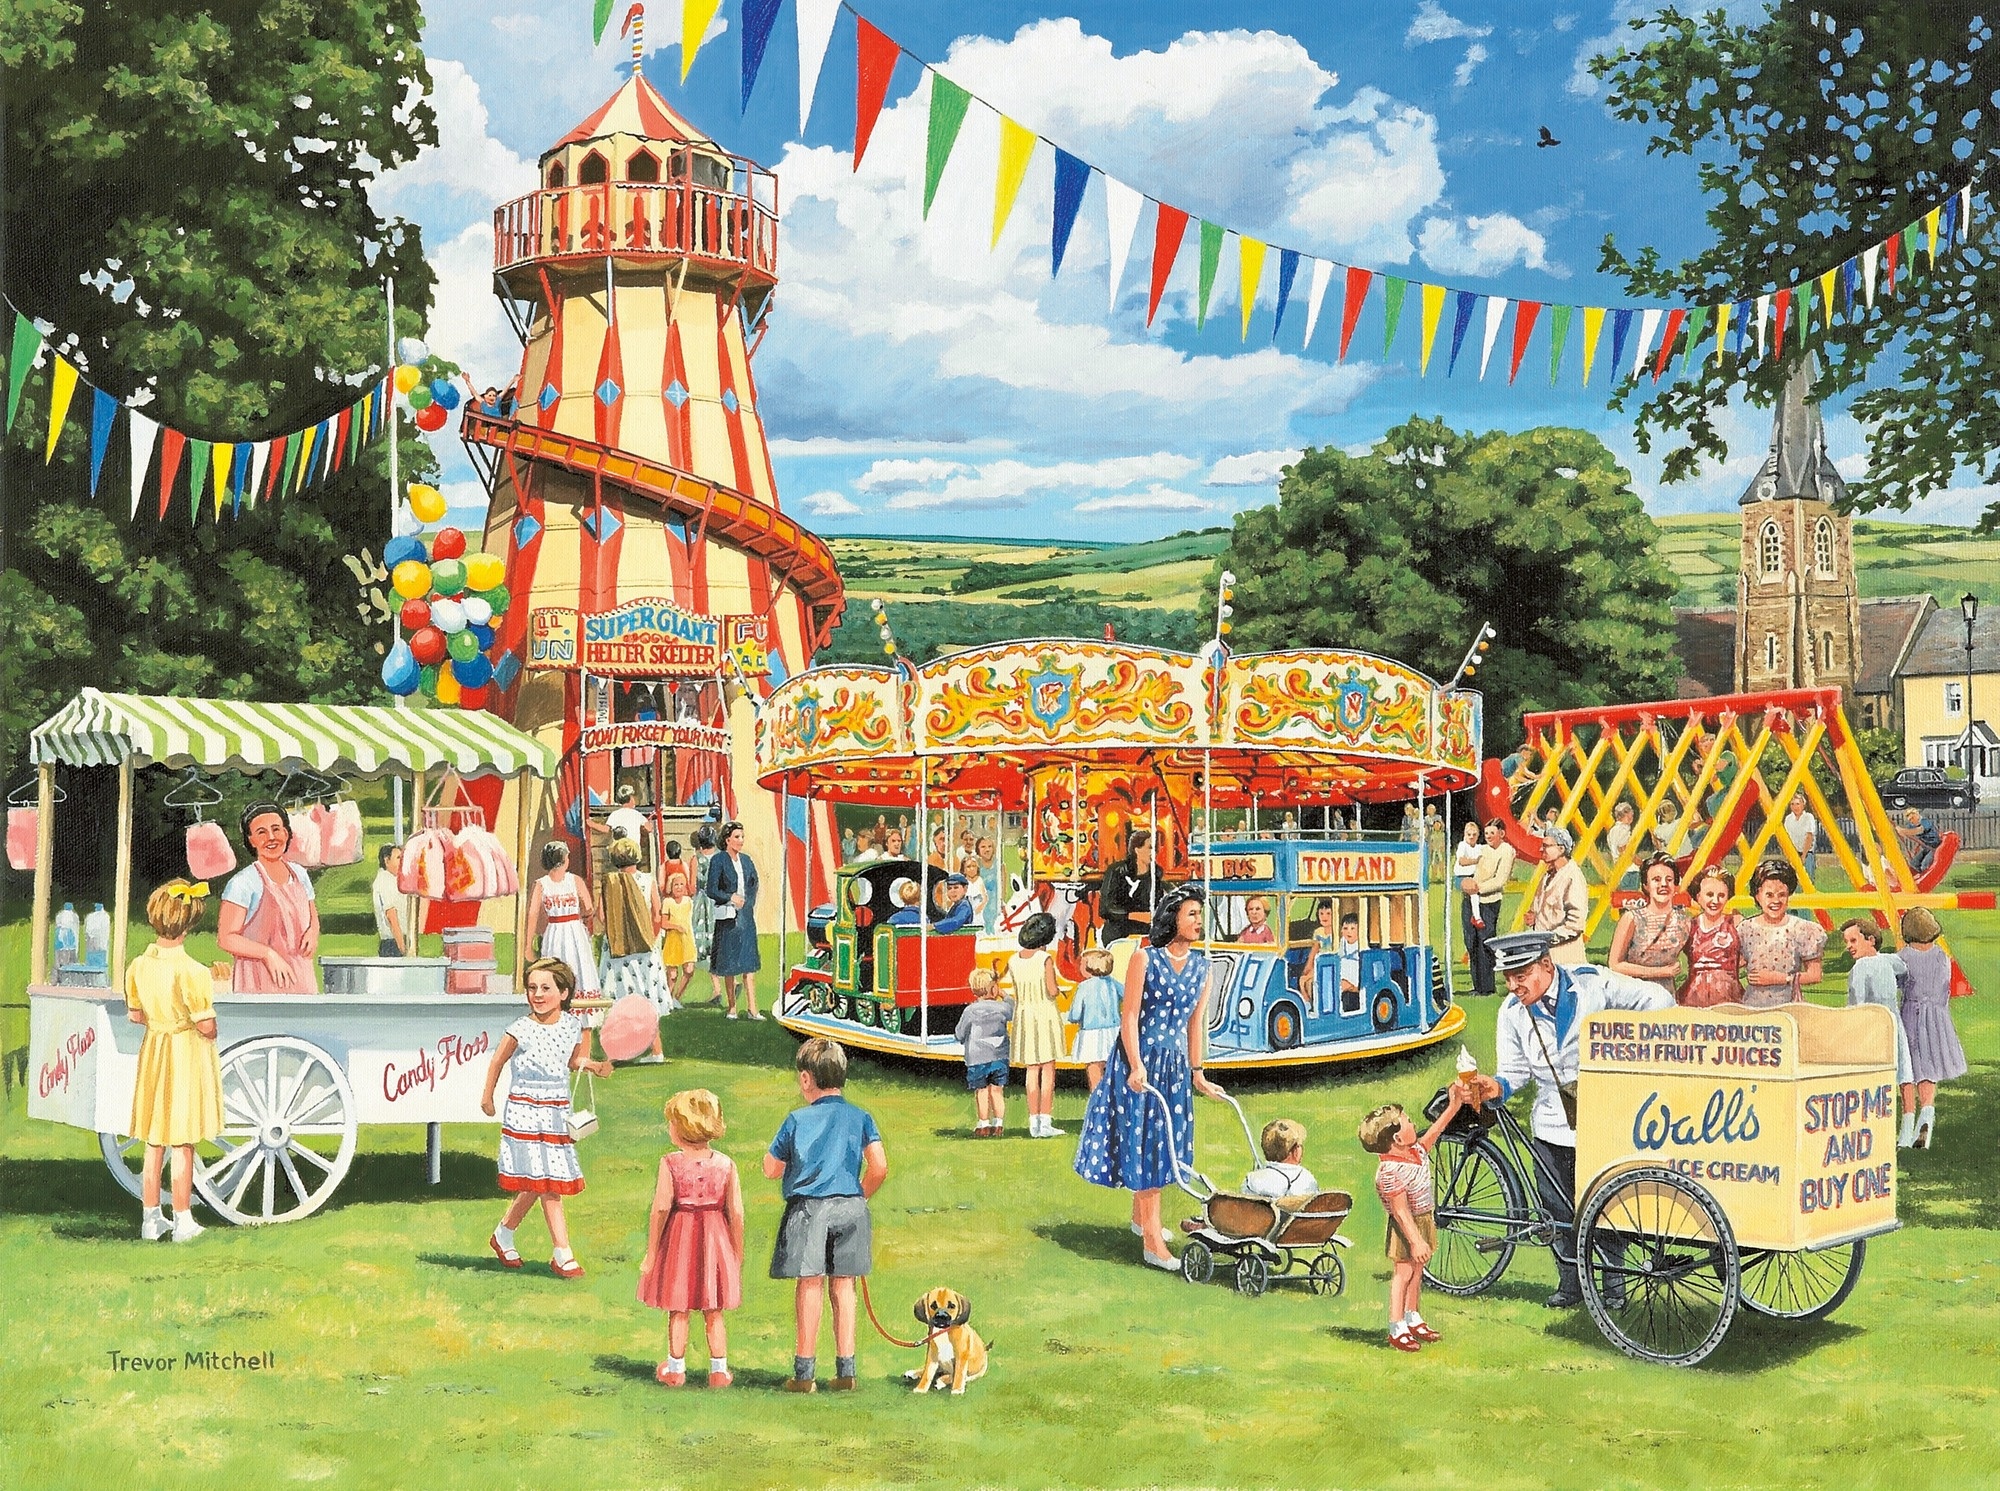 Fun Fair: Helter skelter, Merry-Go-Round, Traveling carnival. 2000x1500 HD Wallpaper.